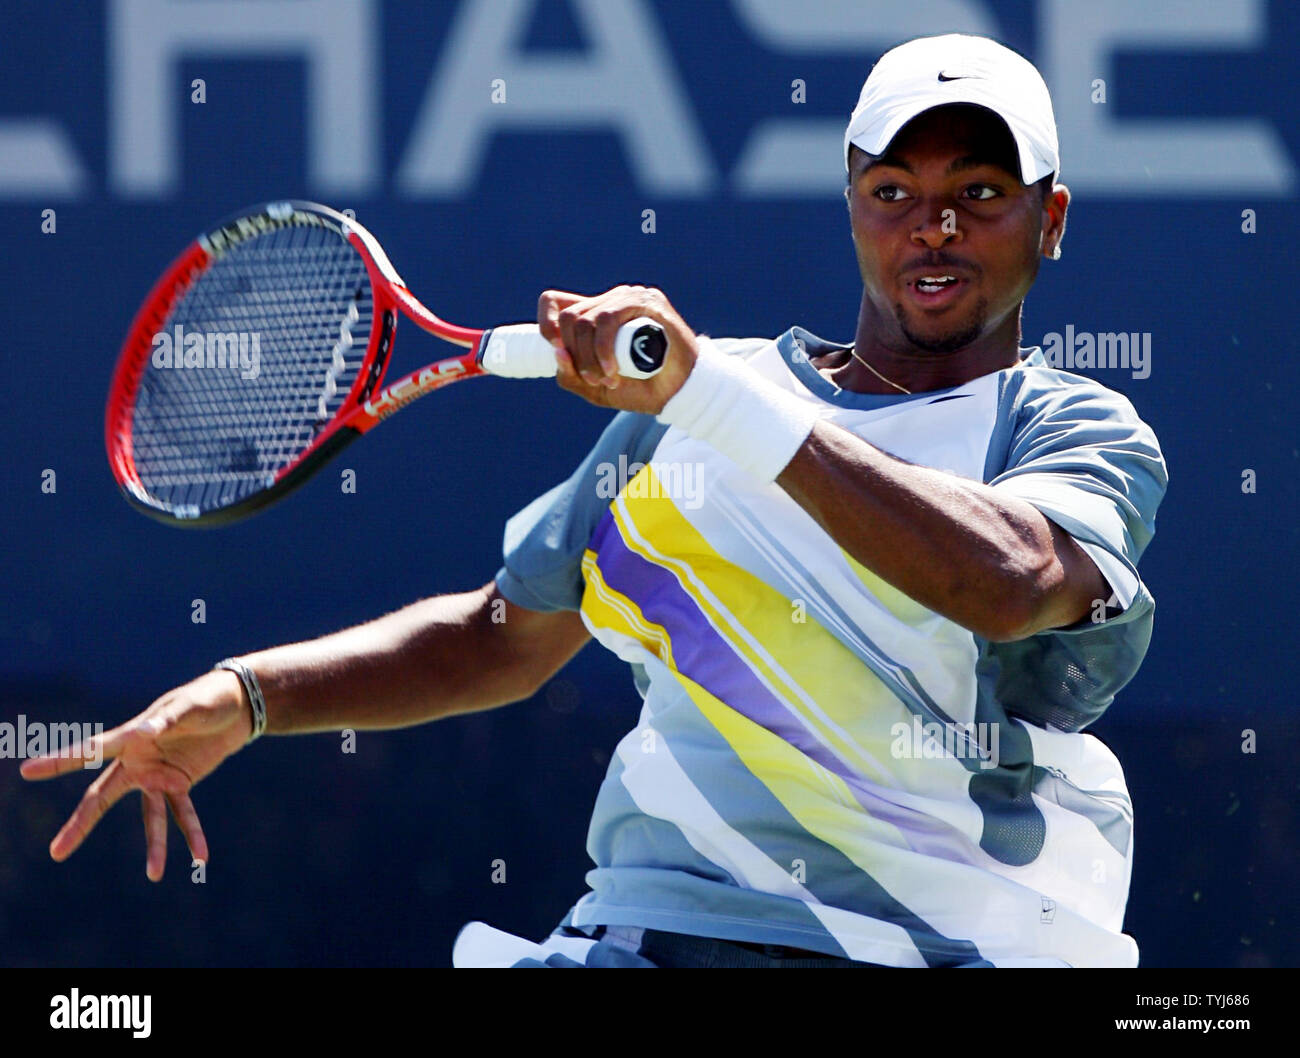 Donald Young follows through on a forehand  in the first set of his match against Chris Guccione at the U.S. Open in New York City on August 27, 2007.  (UPI Photo/John Angelillo) Stock Photo